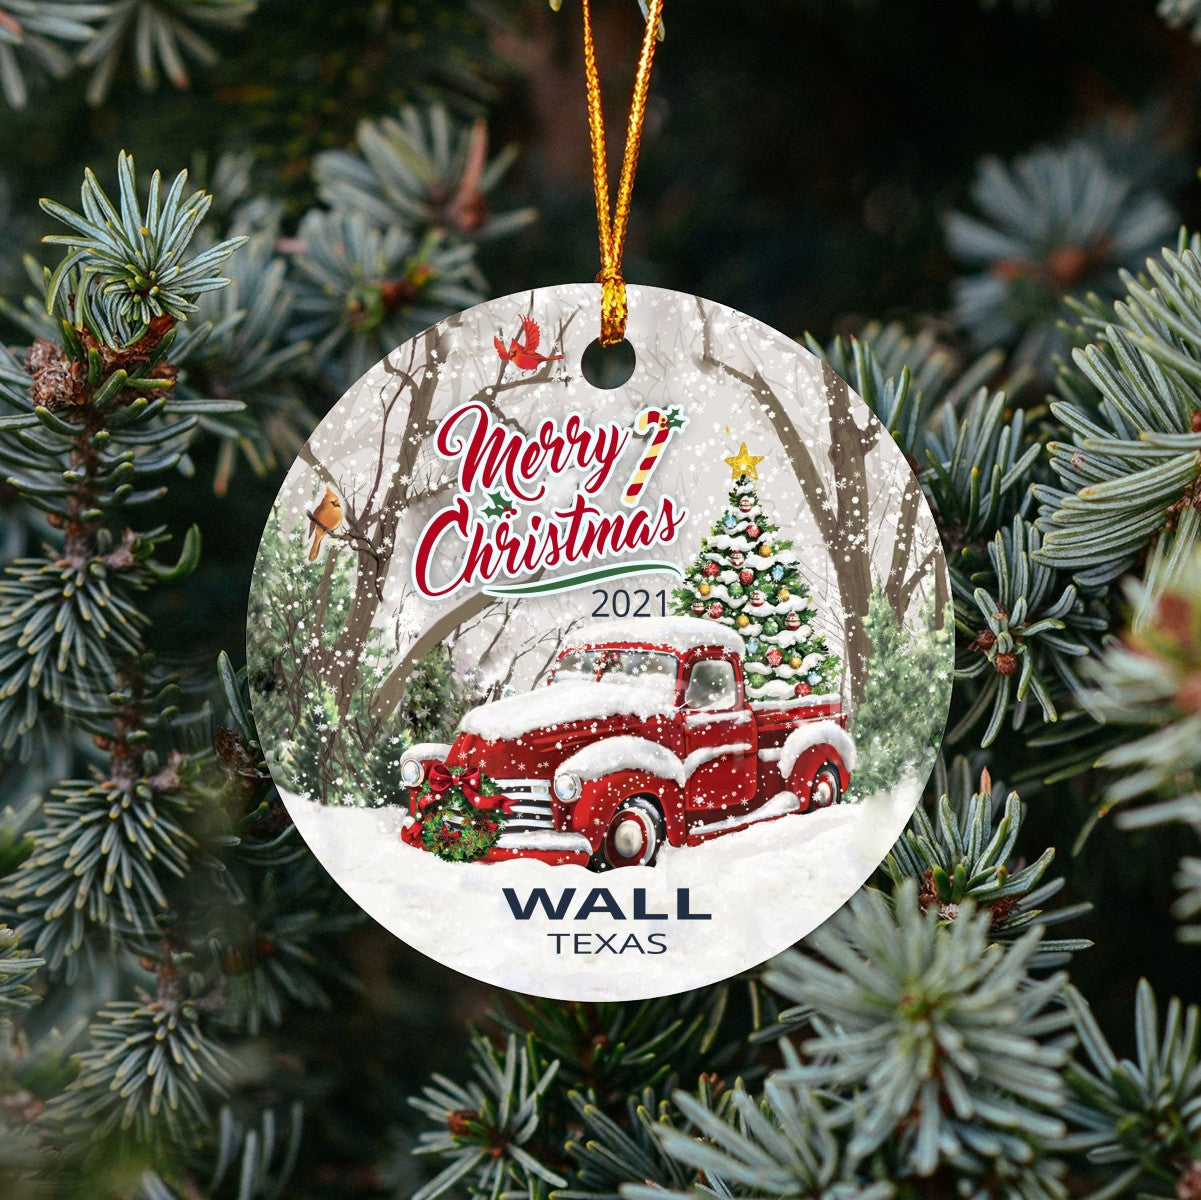 Christmas Tree Ornaments Wall - Ornament With Name City, State Wall Texas TX Ornament - Red Truck Xmas Ornaments 3'' Plastic Gift For Family, Friend And Housewarming